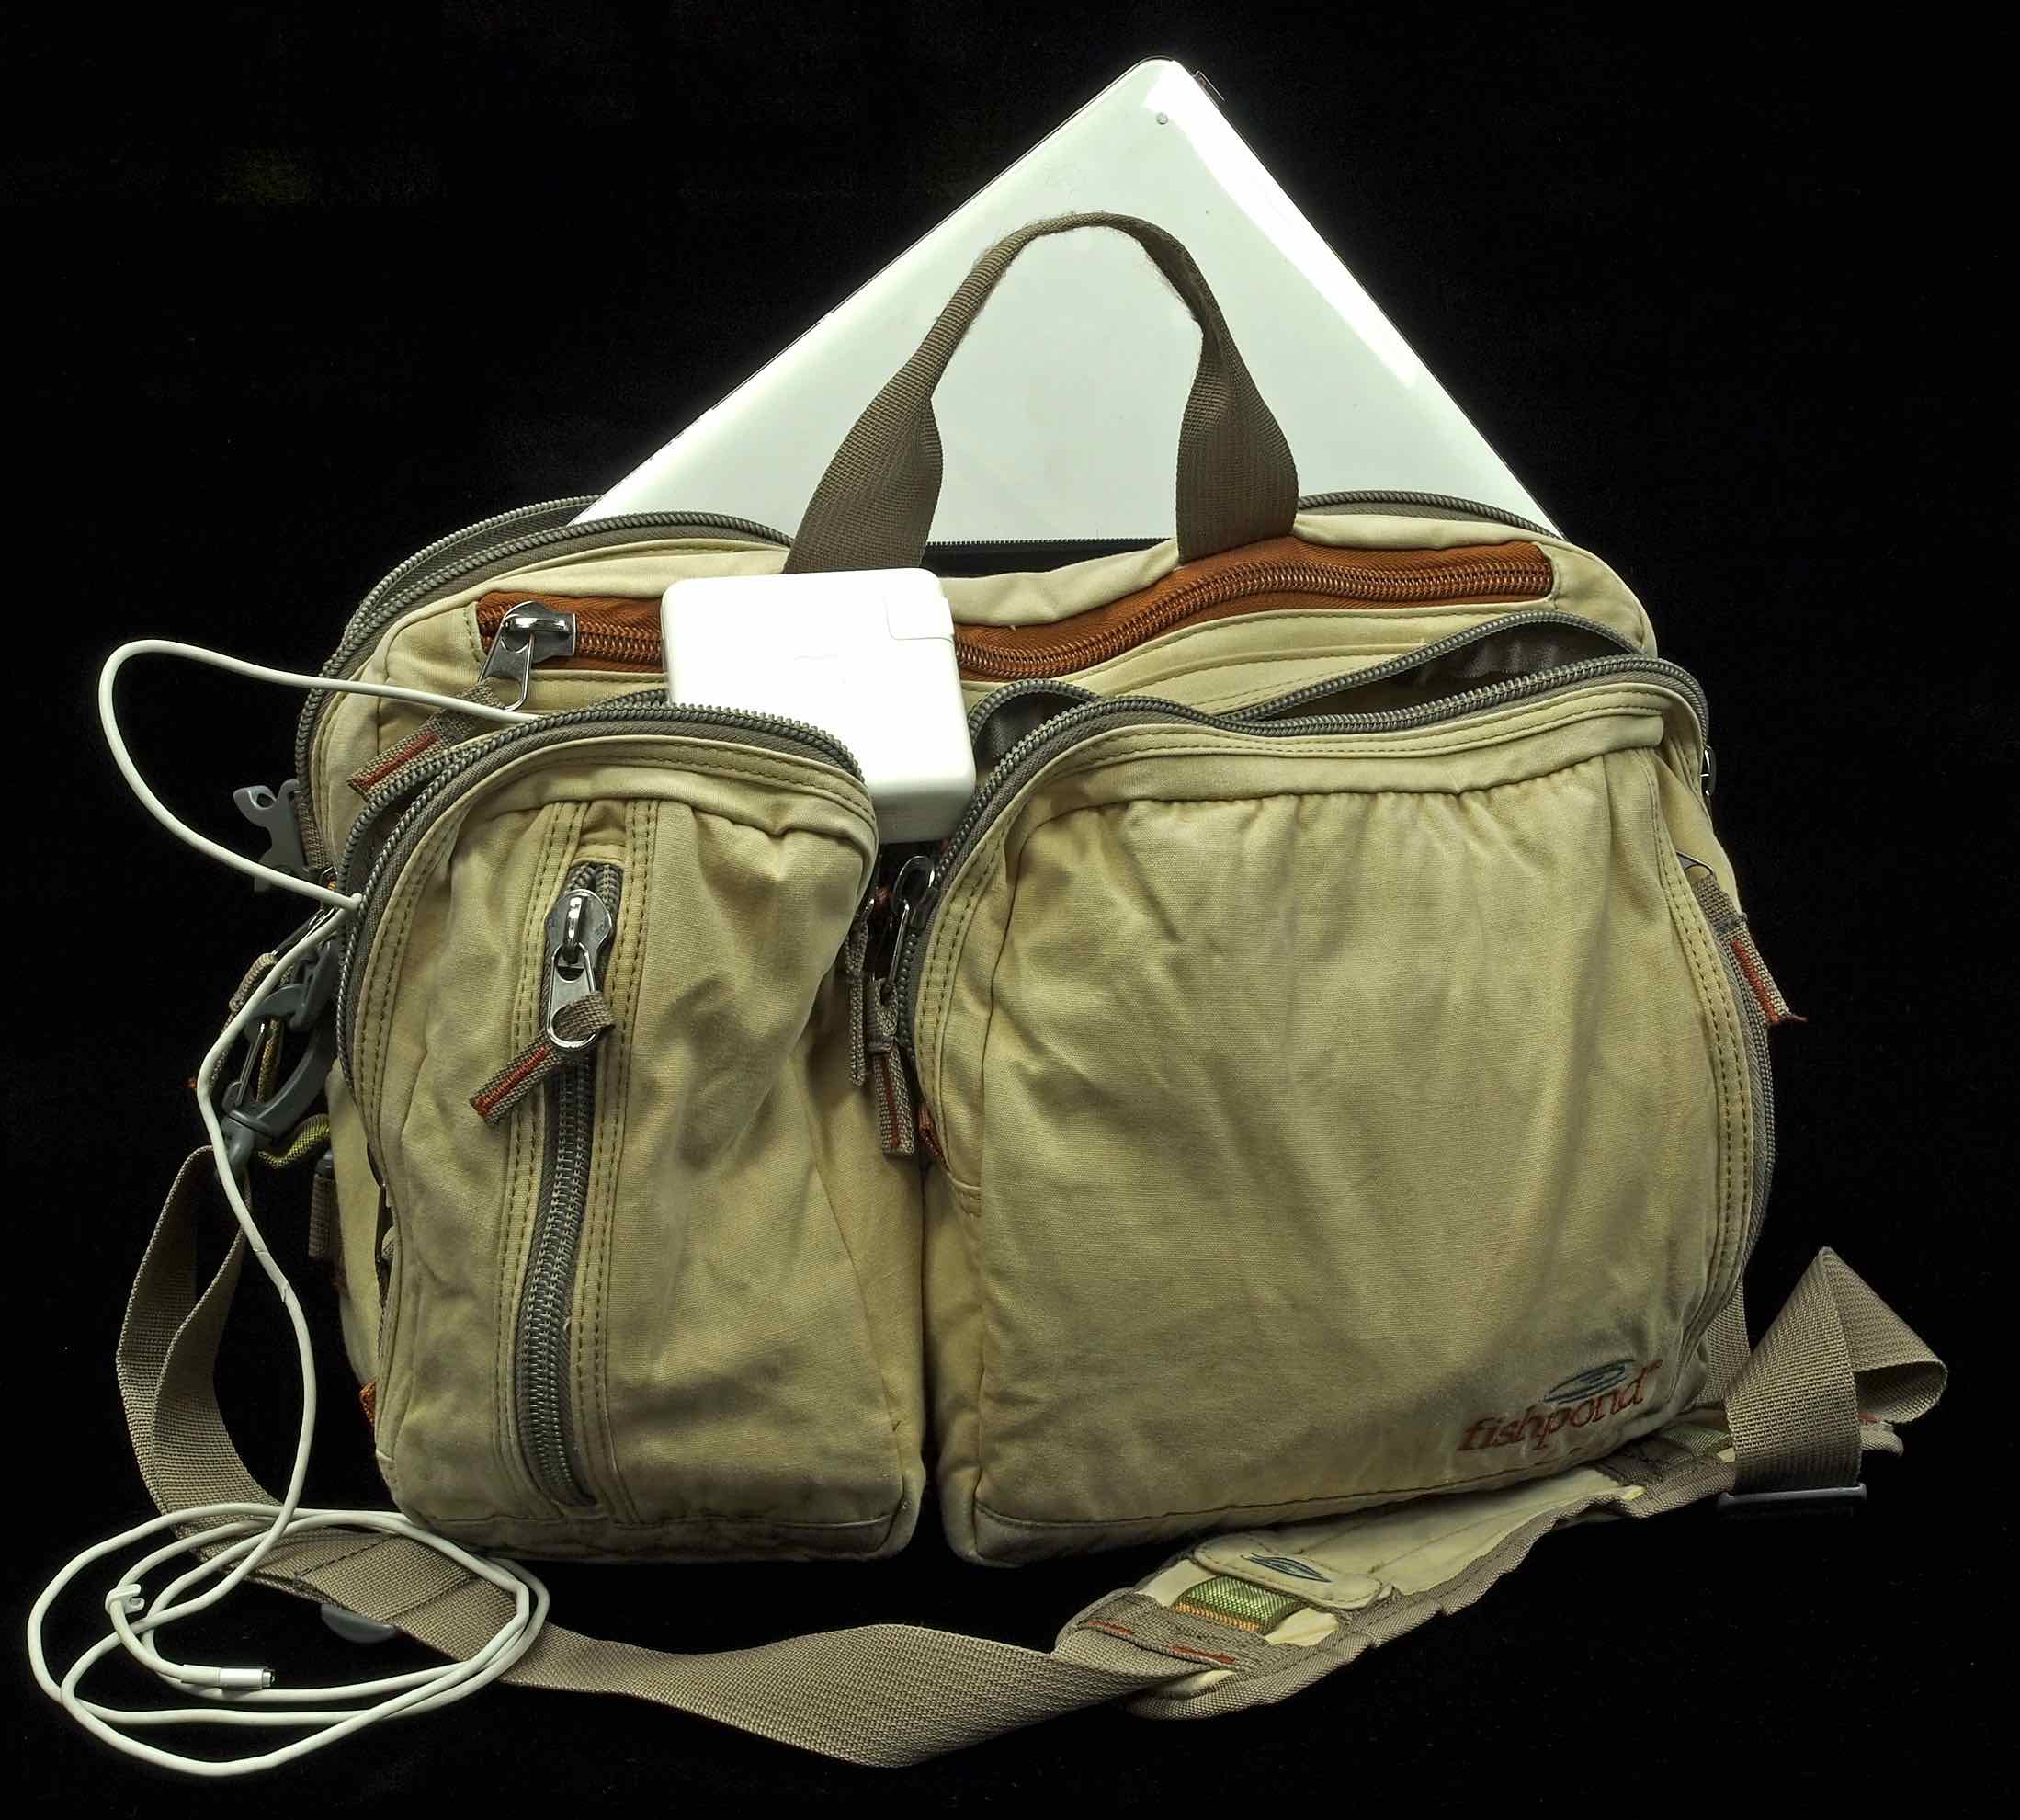 Fishpond Fly Fishing Travel Bag - sporting goods - by owner - sale